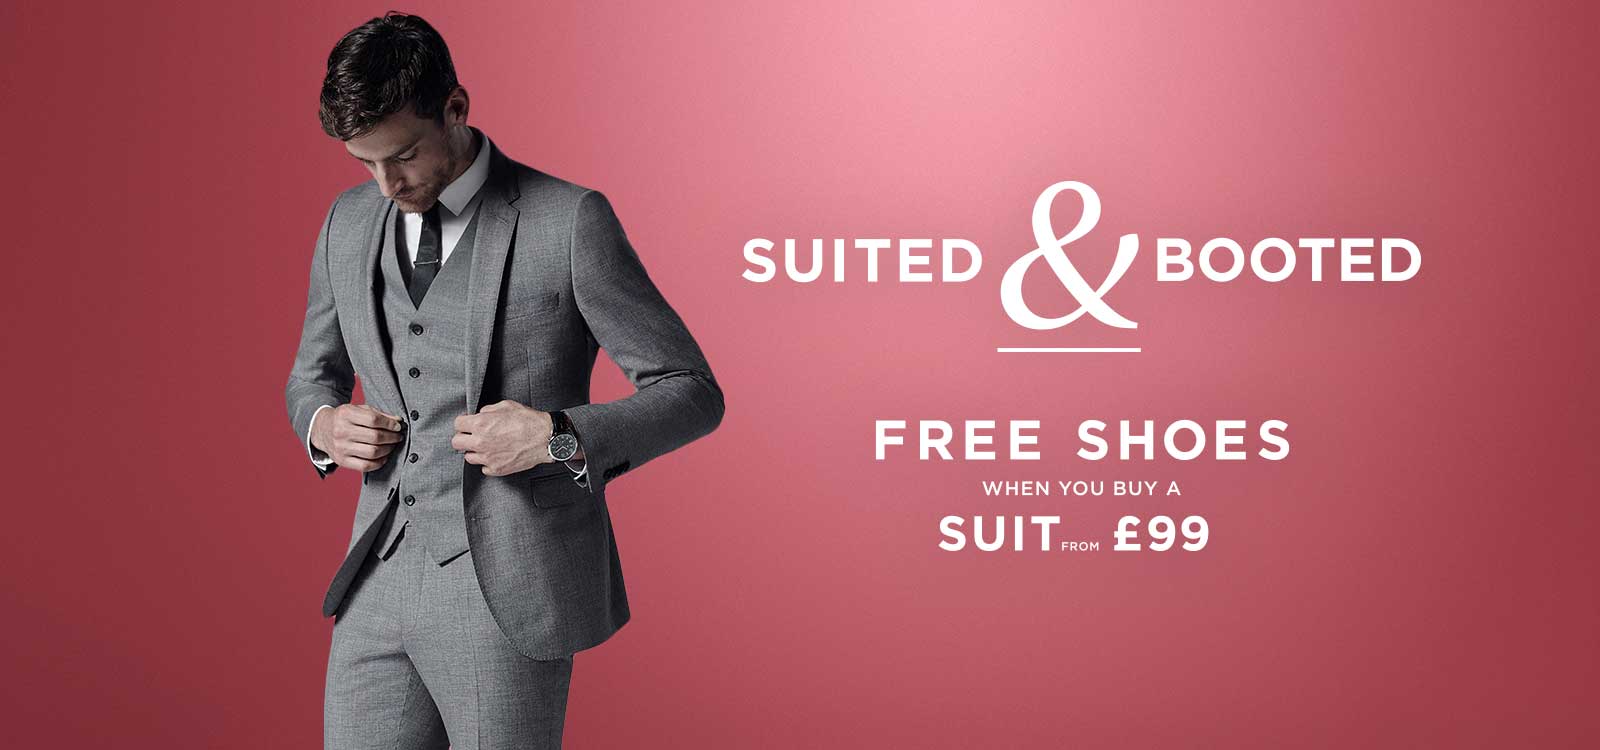 Burton: free shoes if you buy a suit from £99